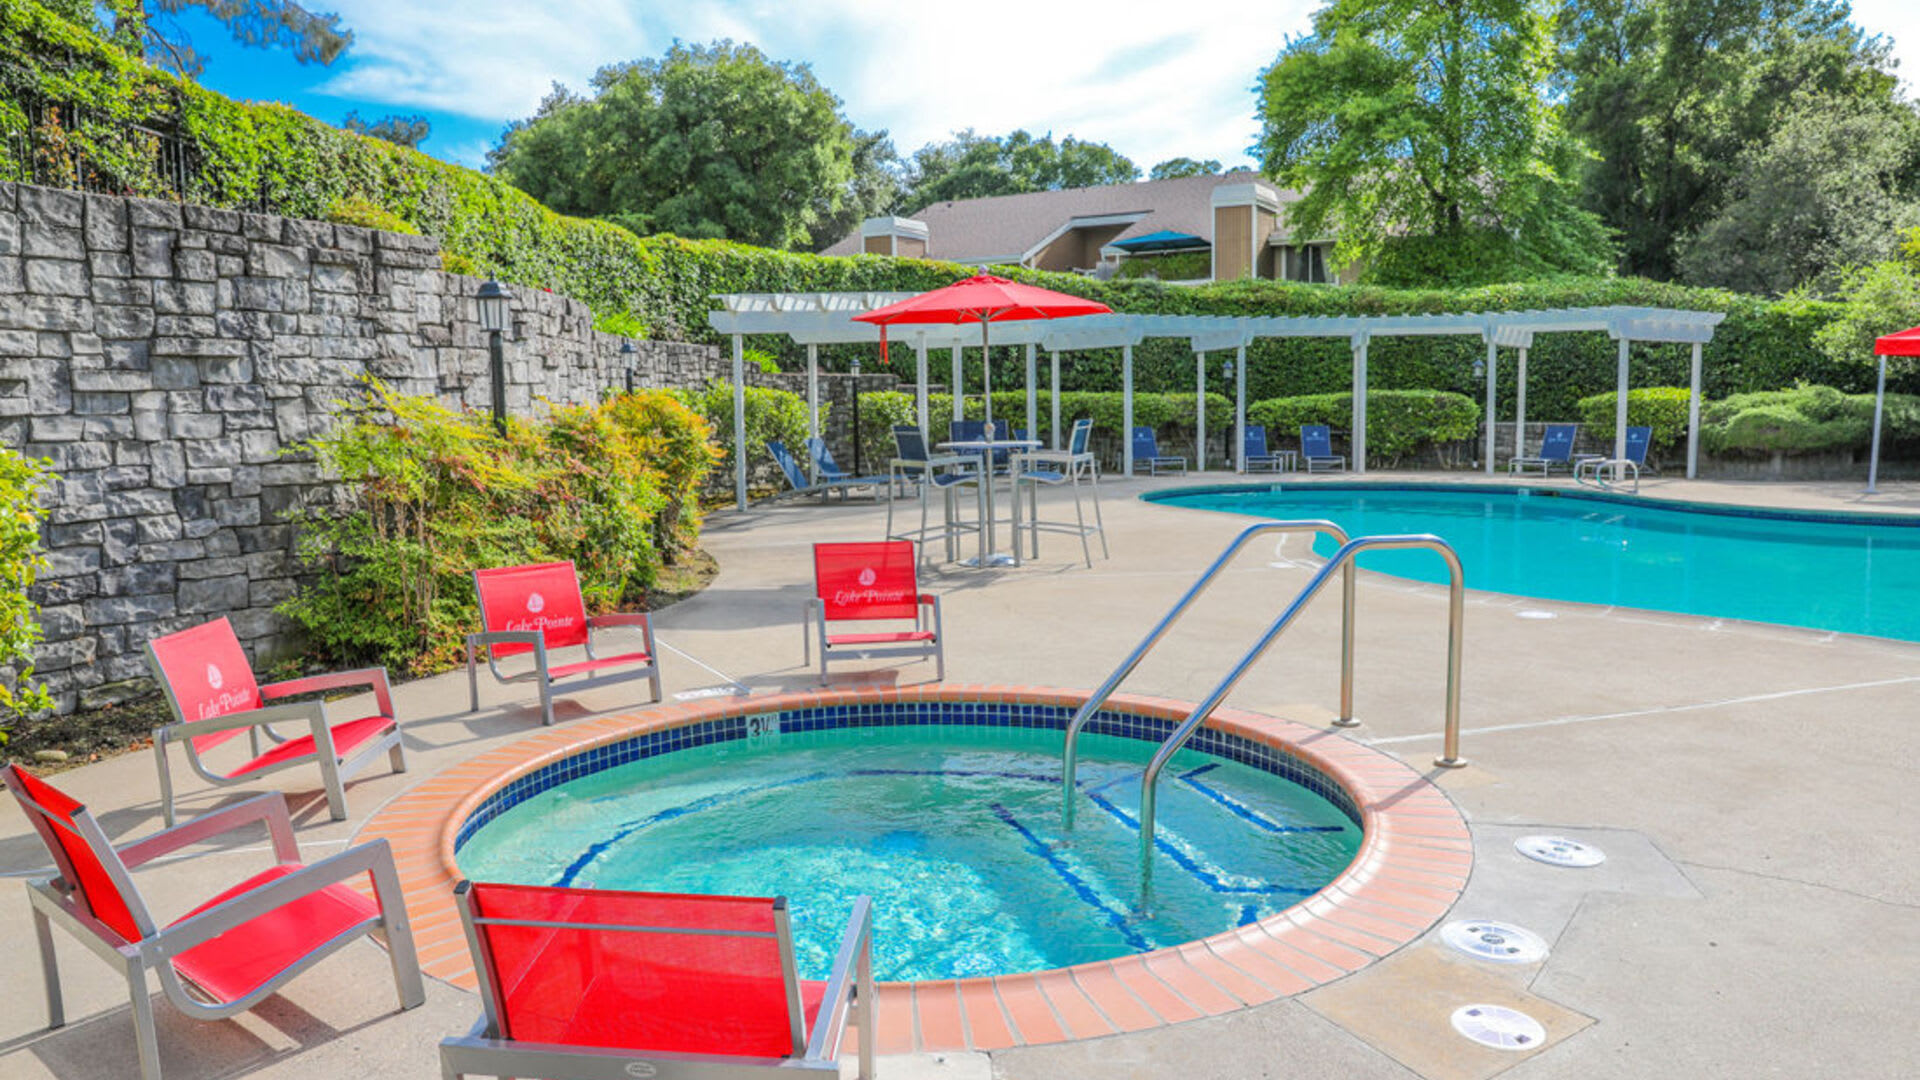 Hot tub and swimming pool at Lake Pointe Apartments in Folsom, California